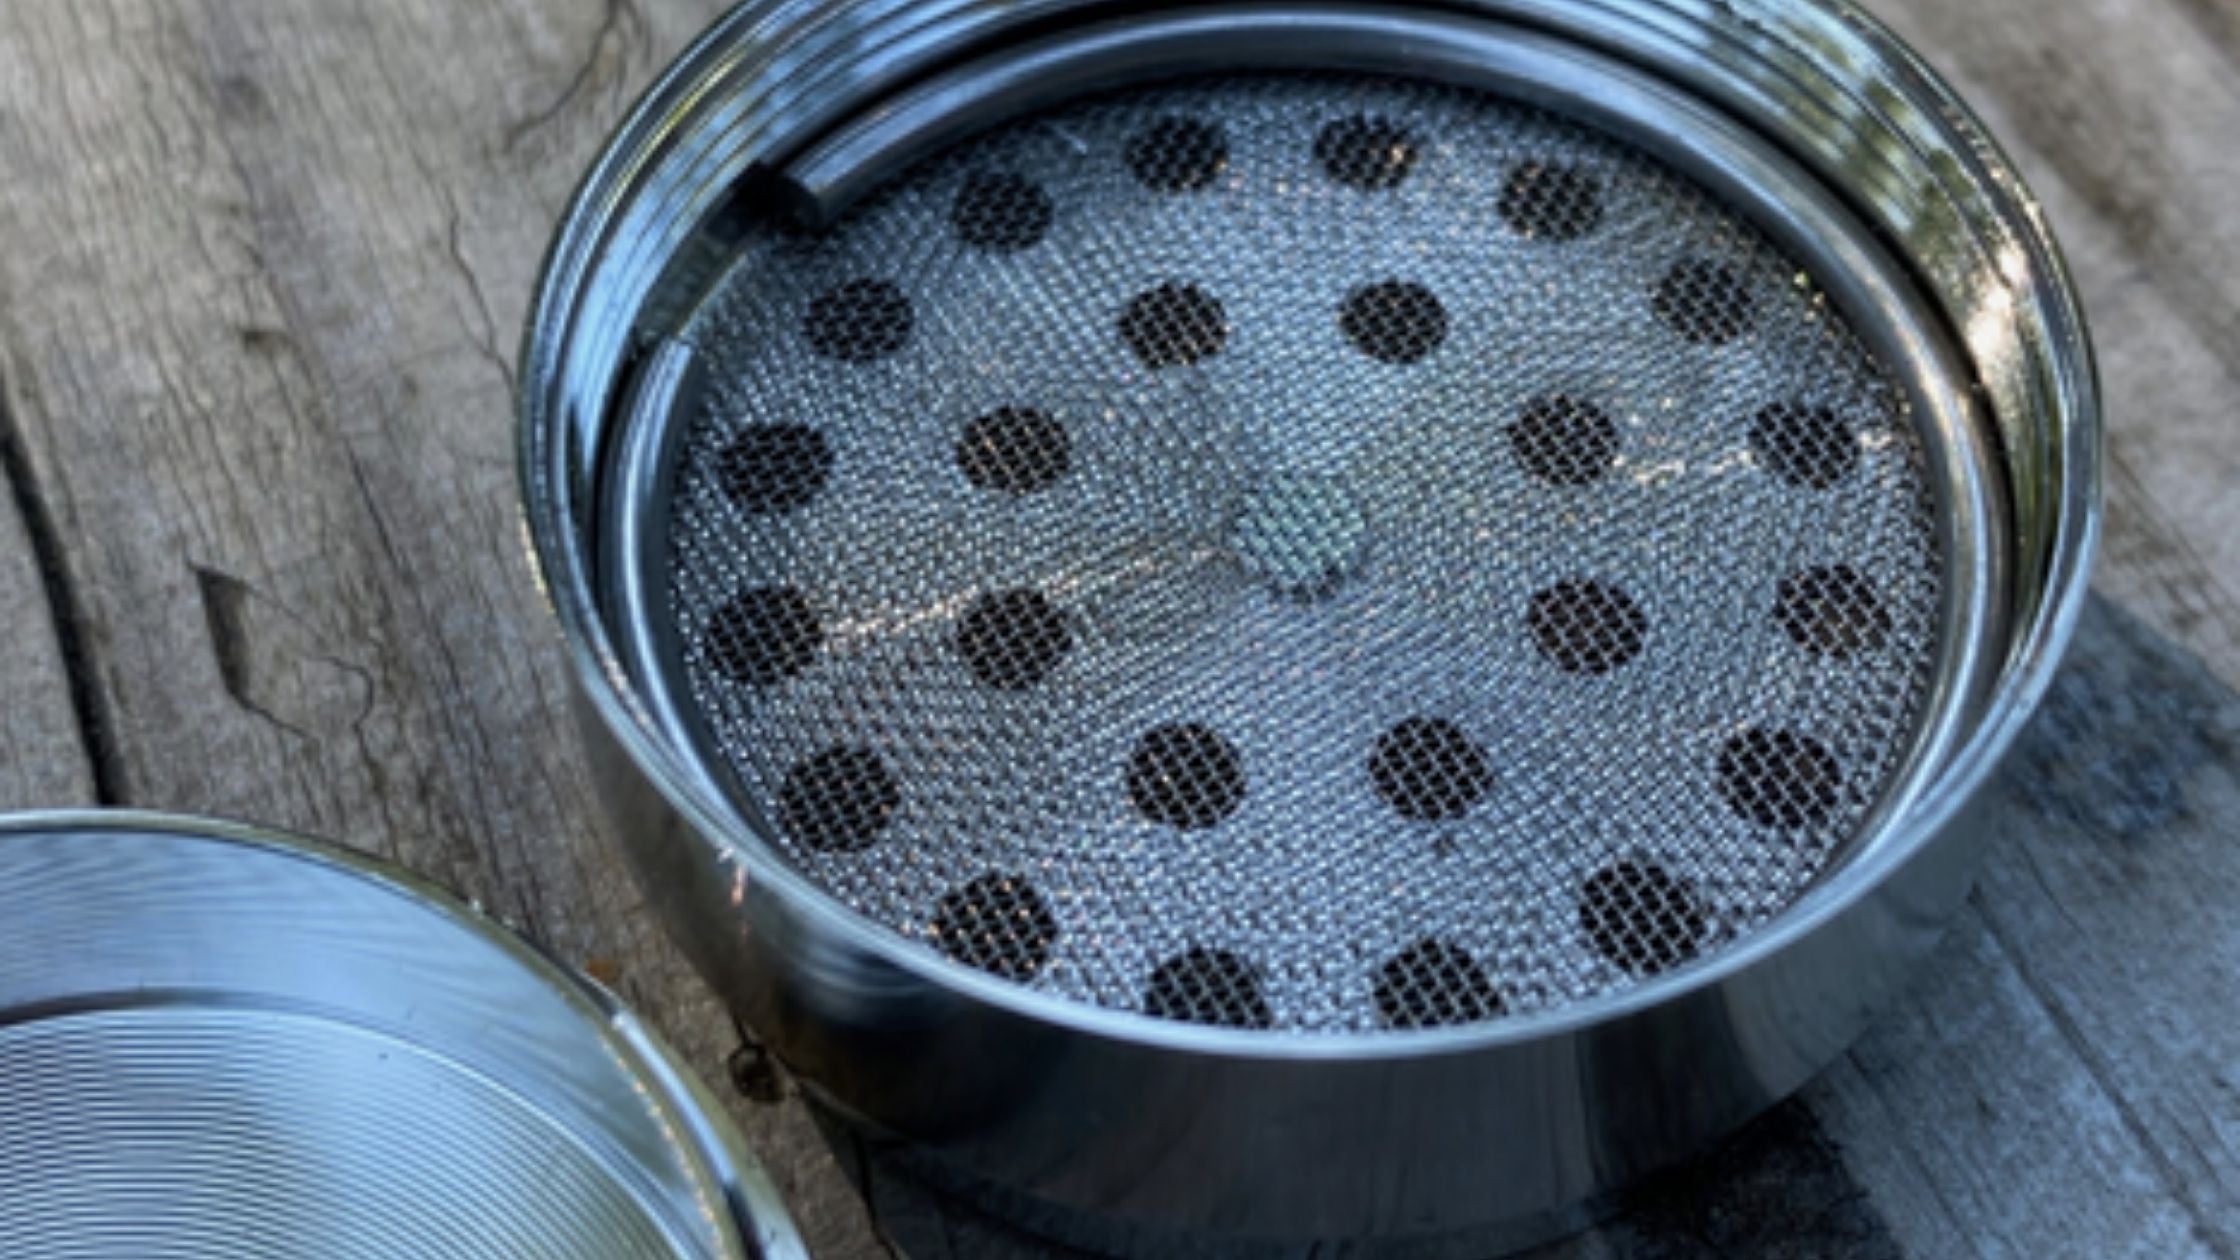 How to Clean a Grinder Screen  Resolution Colo - resolutioncolo